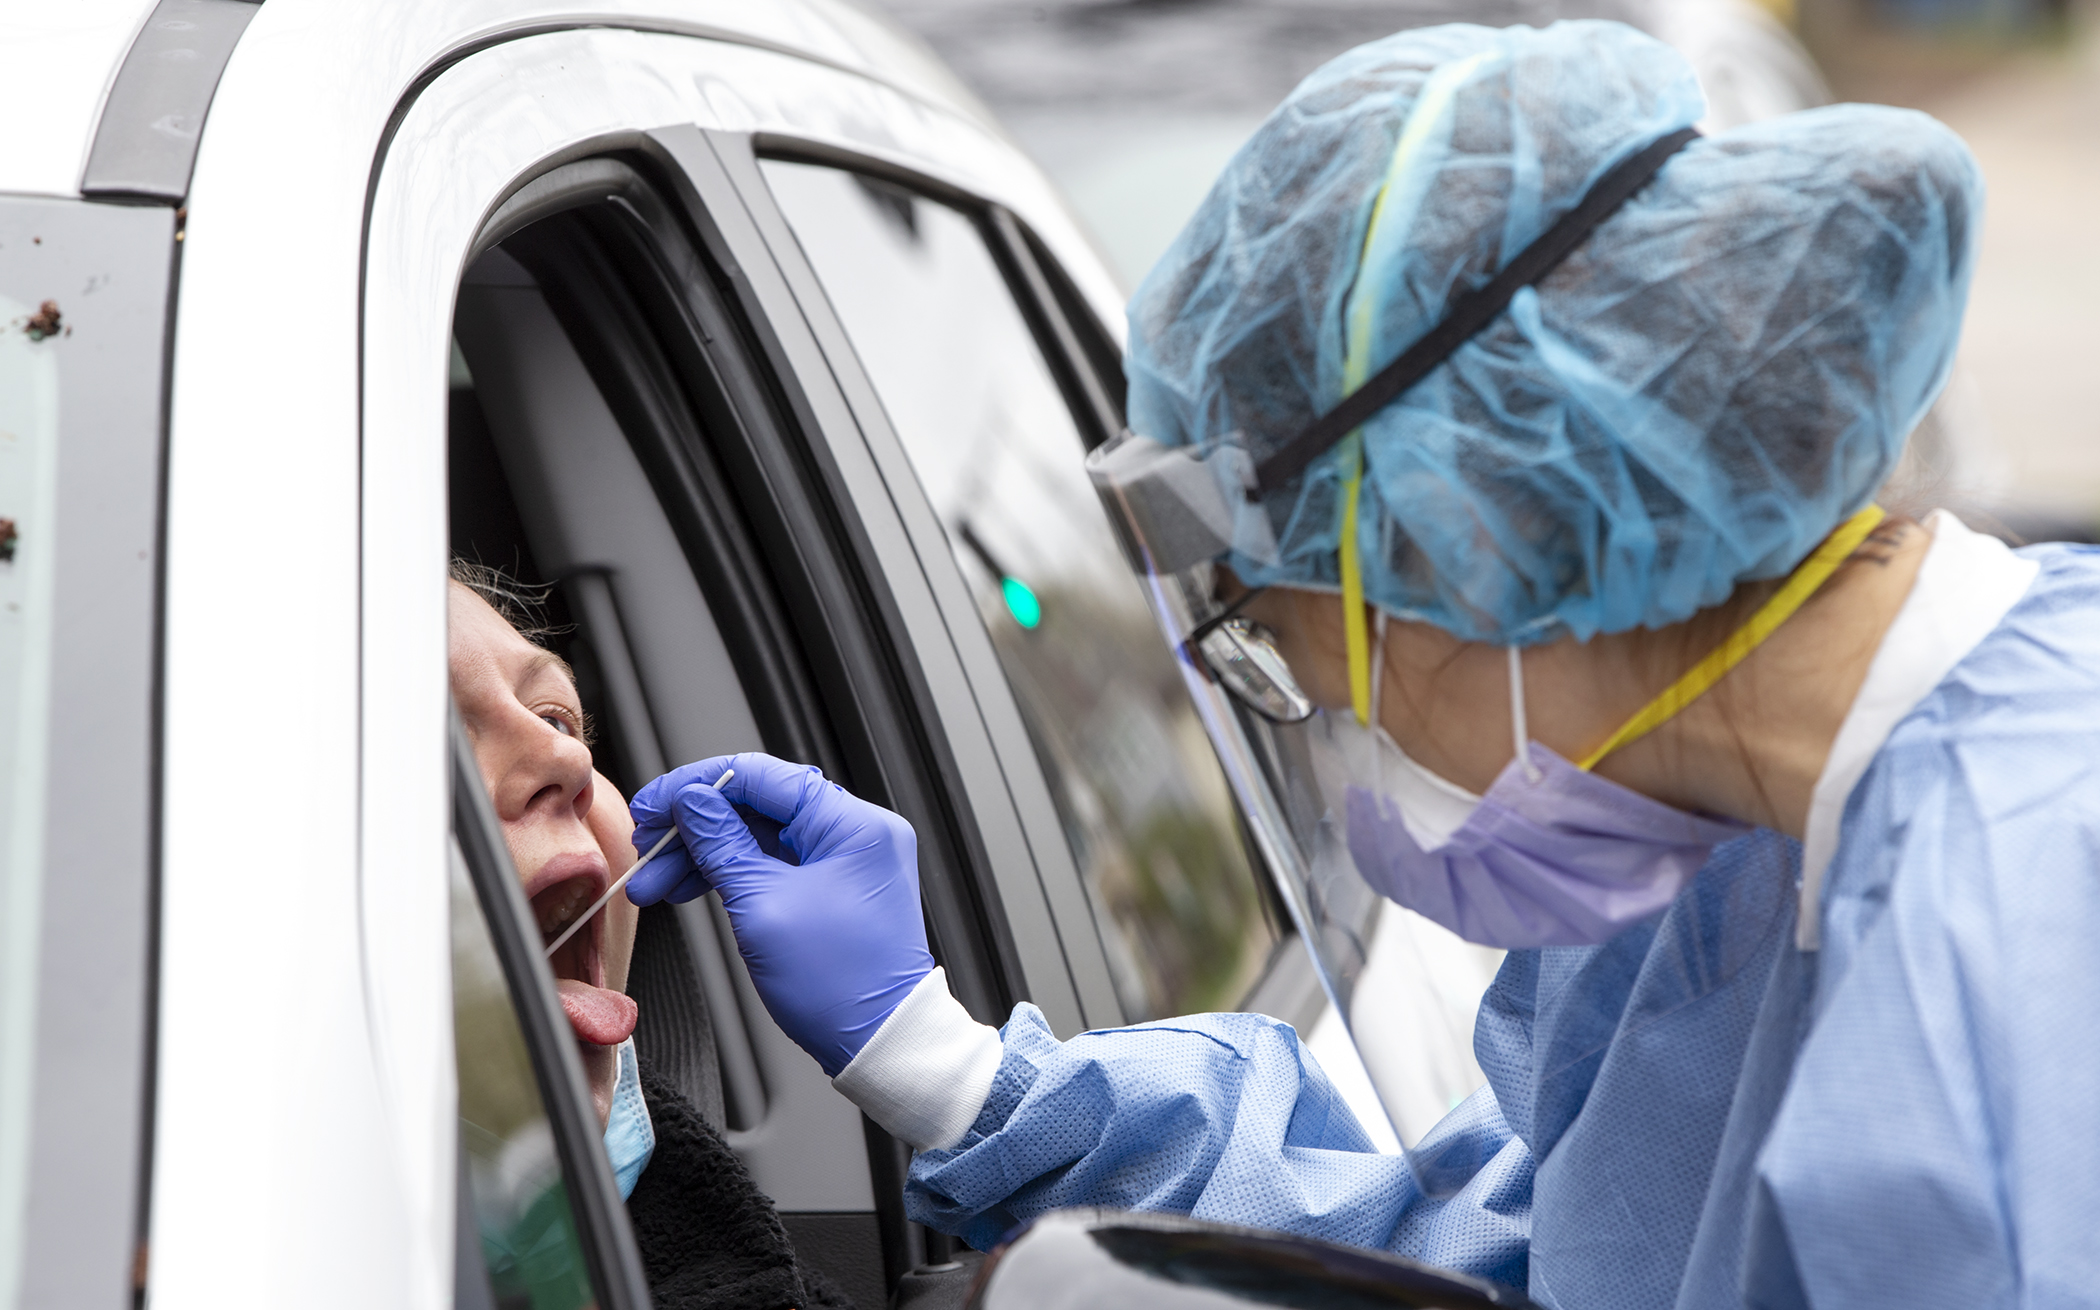 A health care worker takes a swab from a client at the drive-up COVID-19 testing site at the People’s Center Clinics and Services in Minneapolis April 29. Photo by Paul Battaglia